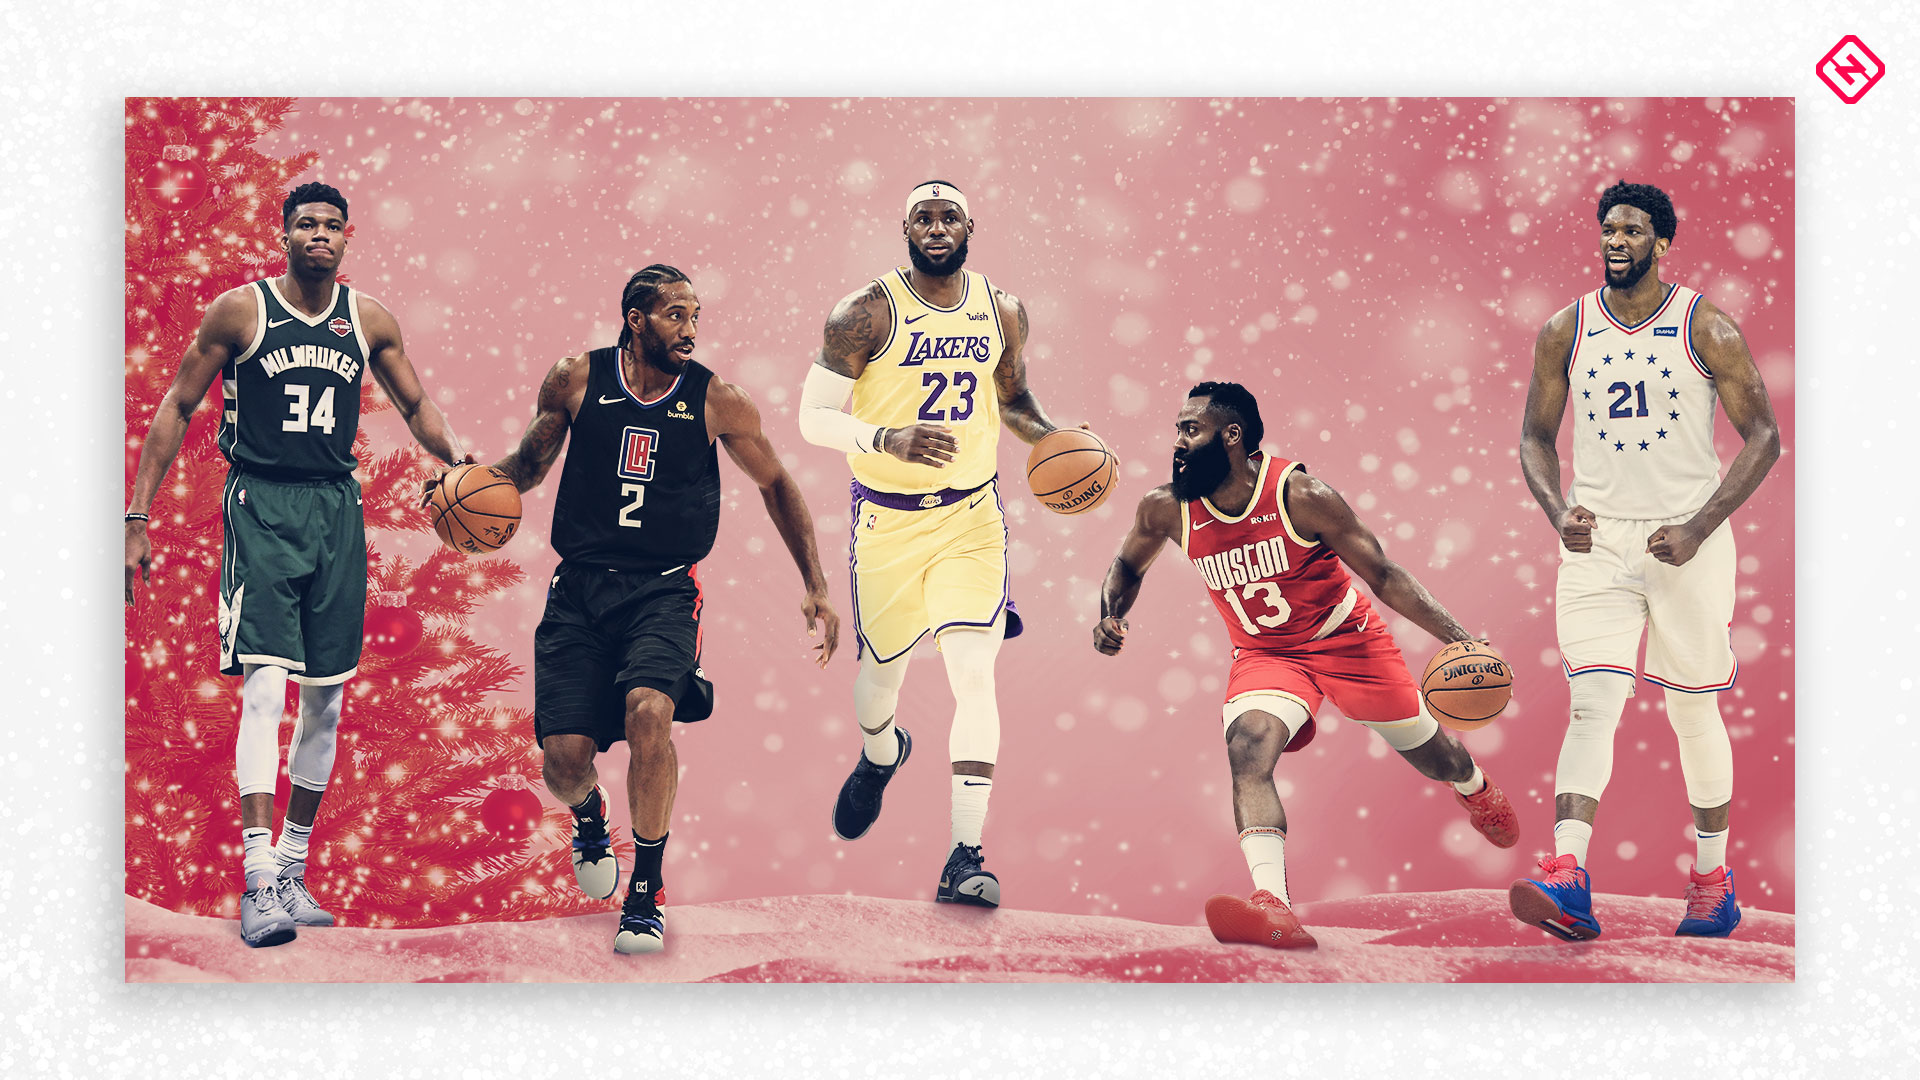 NBA Christmas schedule 2019: What basketball games are on today? TV channels, times, scores ...